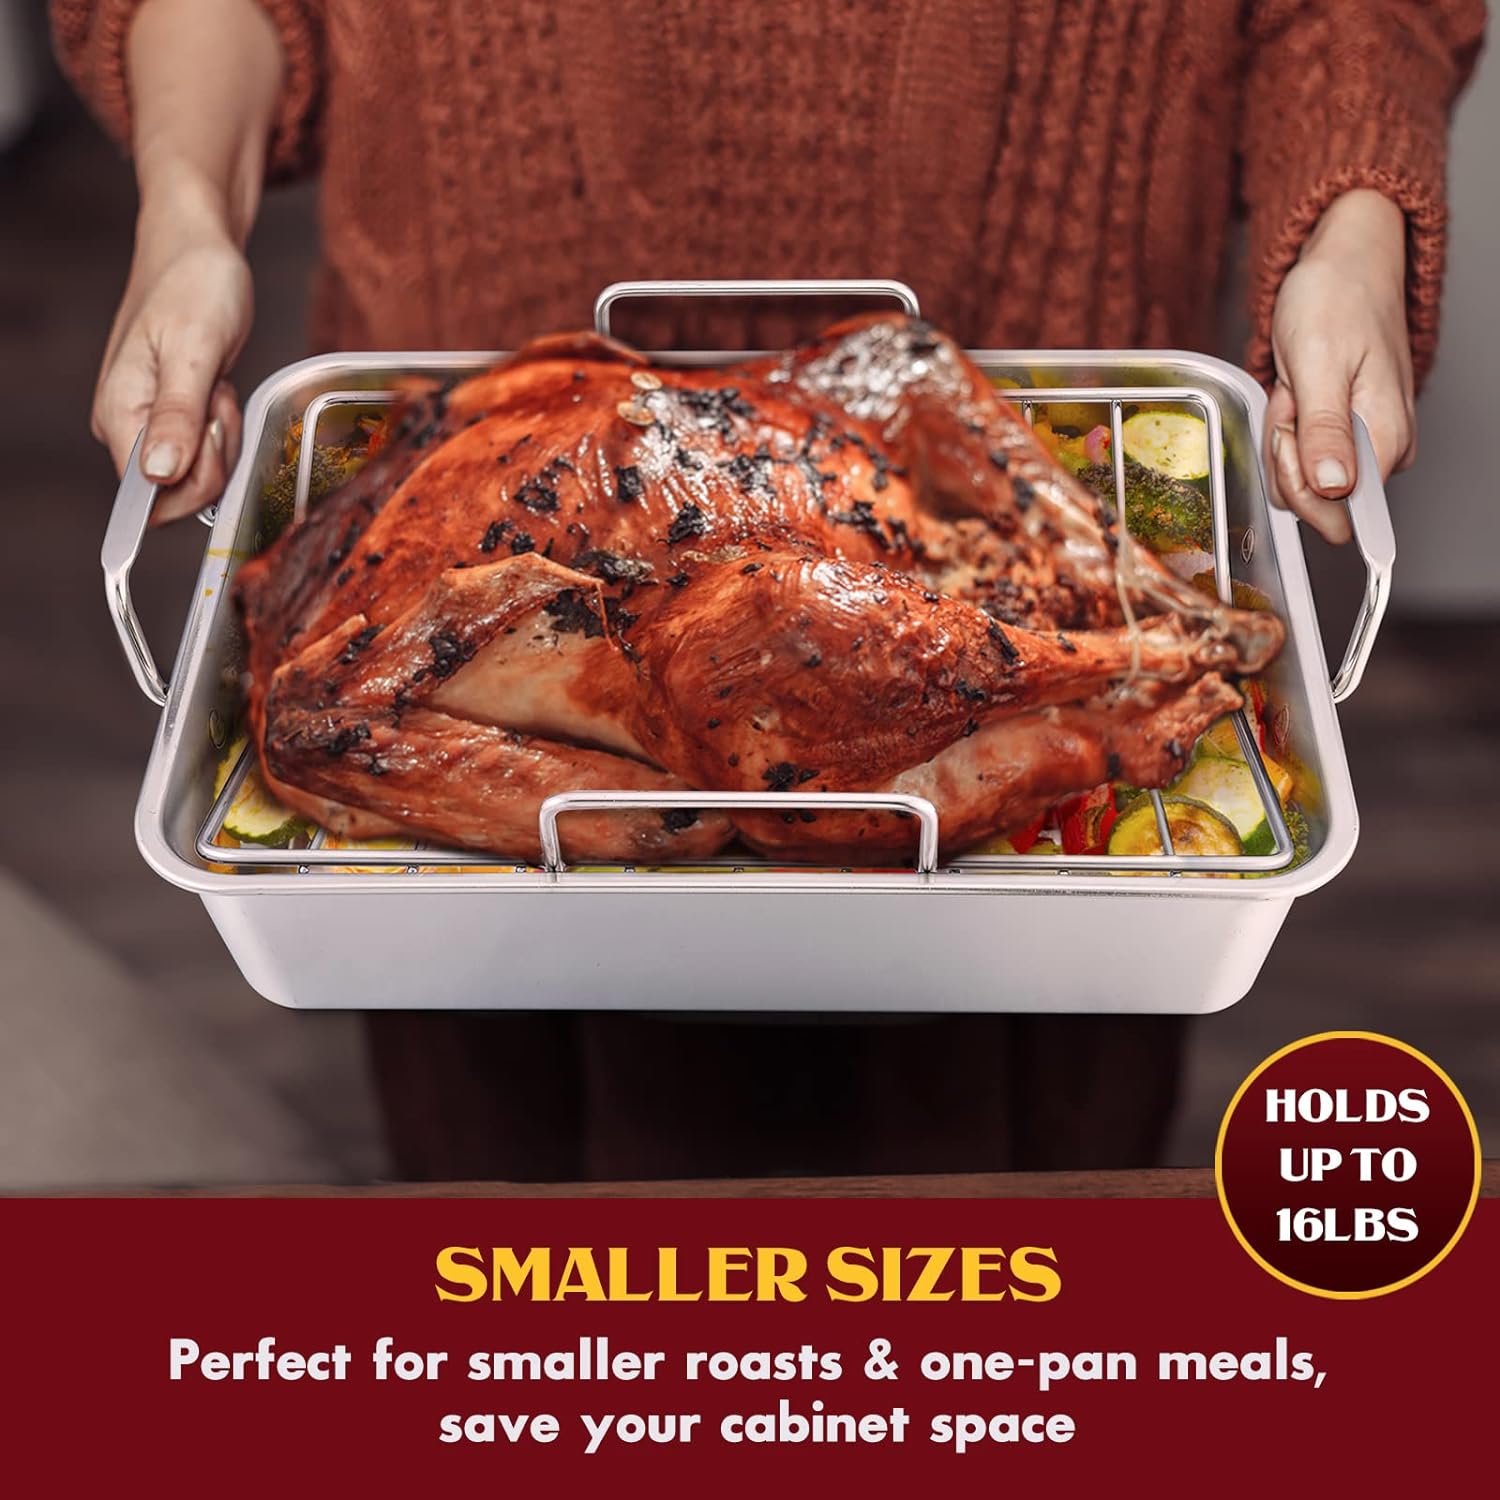 Small Roasting Pan, E-far 14 Inch Heavy Duty Stainless Steel Turkey Roaster with V Rack  Baking Rack Set, Metal Deep Broiling Pan for Oven Cooking Lasagna Meat Chicken - Dishwasher Safe